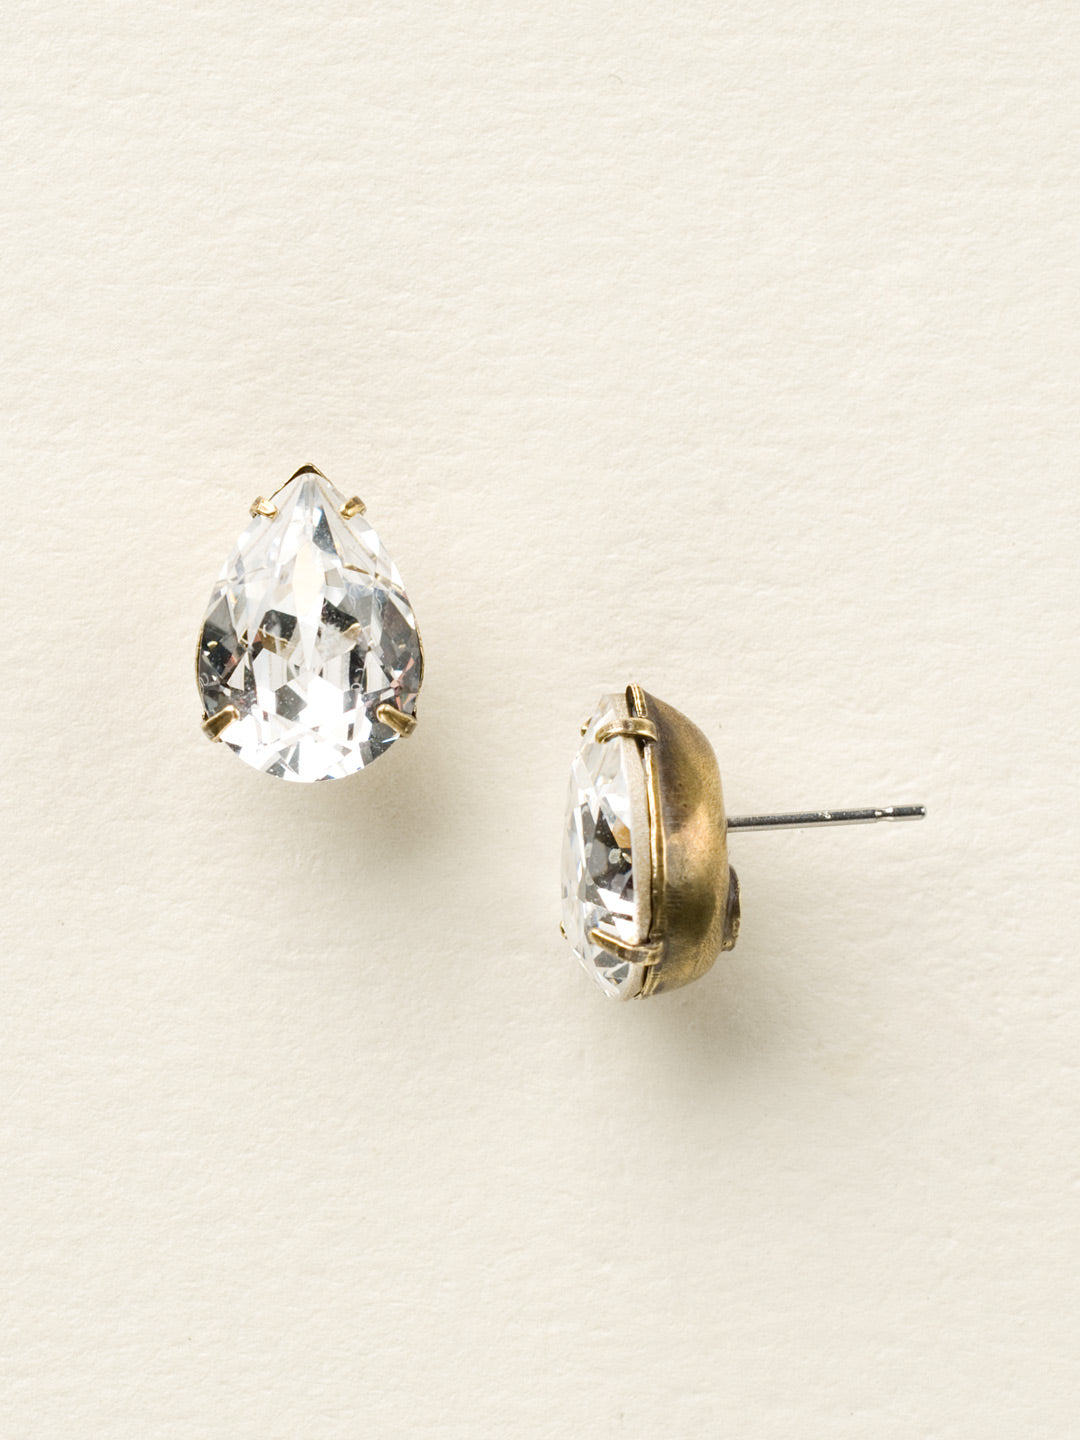 Ginnie Stud Earrings - ECR115AGCCL - <p>A beautiful basic stud. These classic single teardrop post earrings are perfect for any occasion, especially the everyday look. A timeless treasure that will sparkle season after season. From Sorrelli's Crystal Clear collection in our Antique Gold-tone finish.</p>